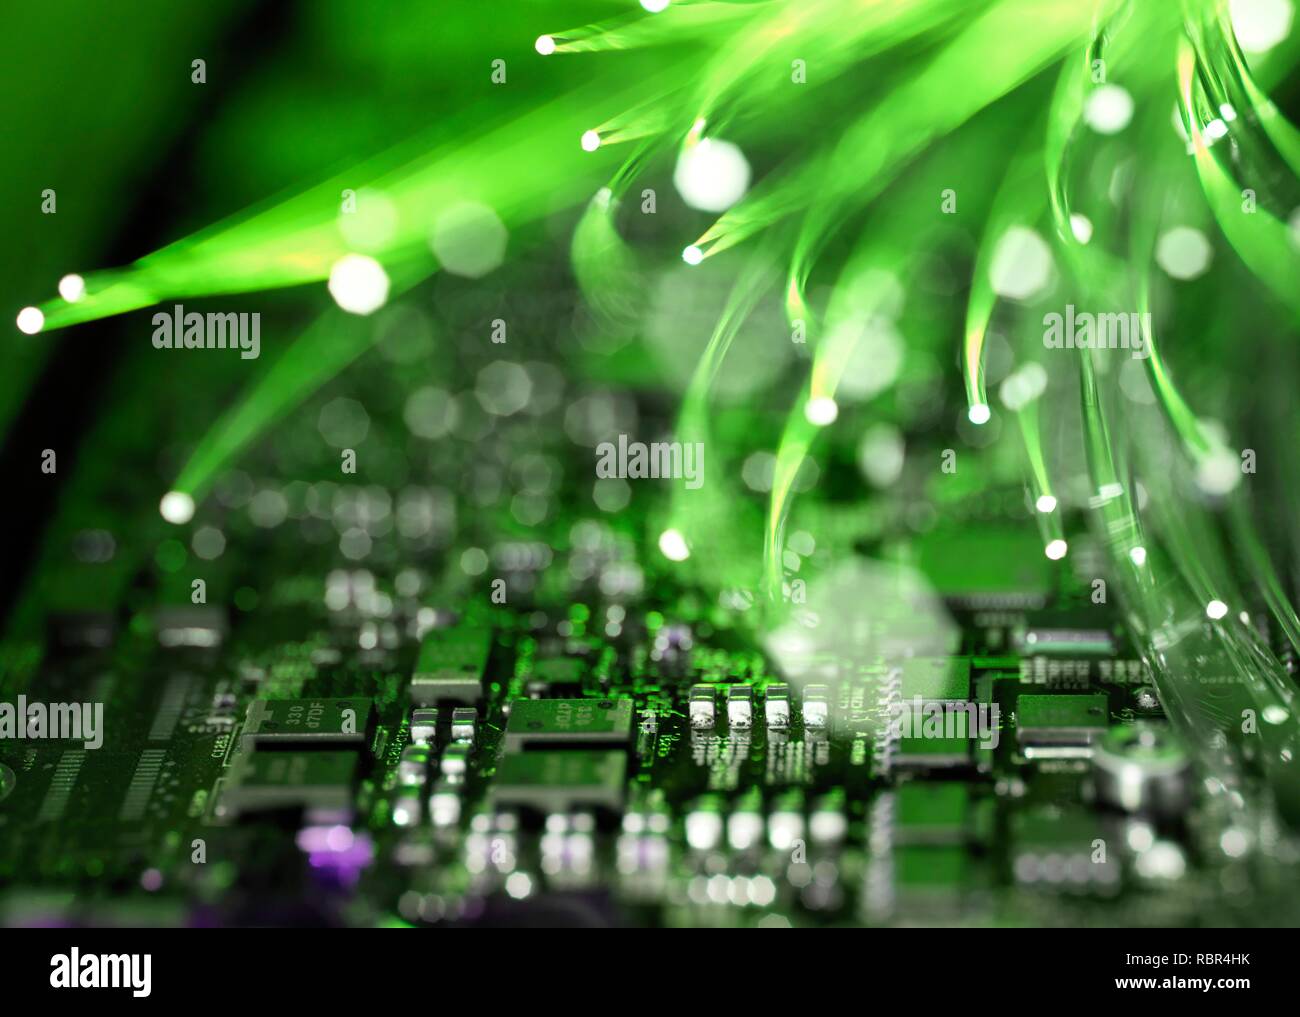 Fibre optics carrying data over electronic circuitry on a laptop computer. Stock Photo